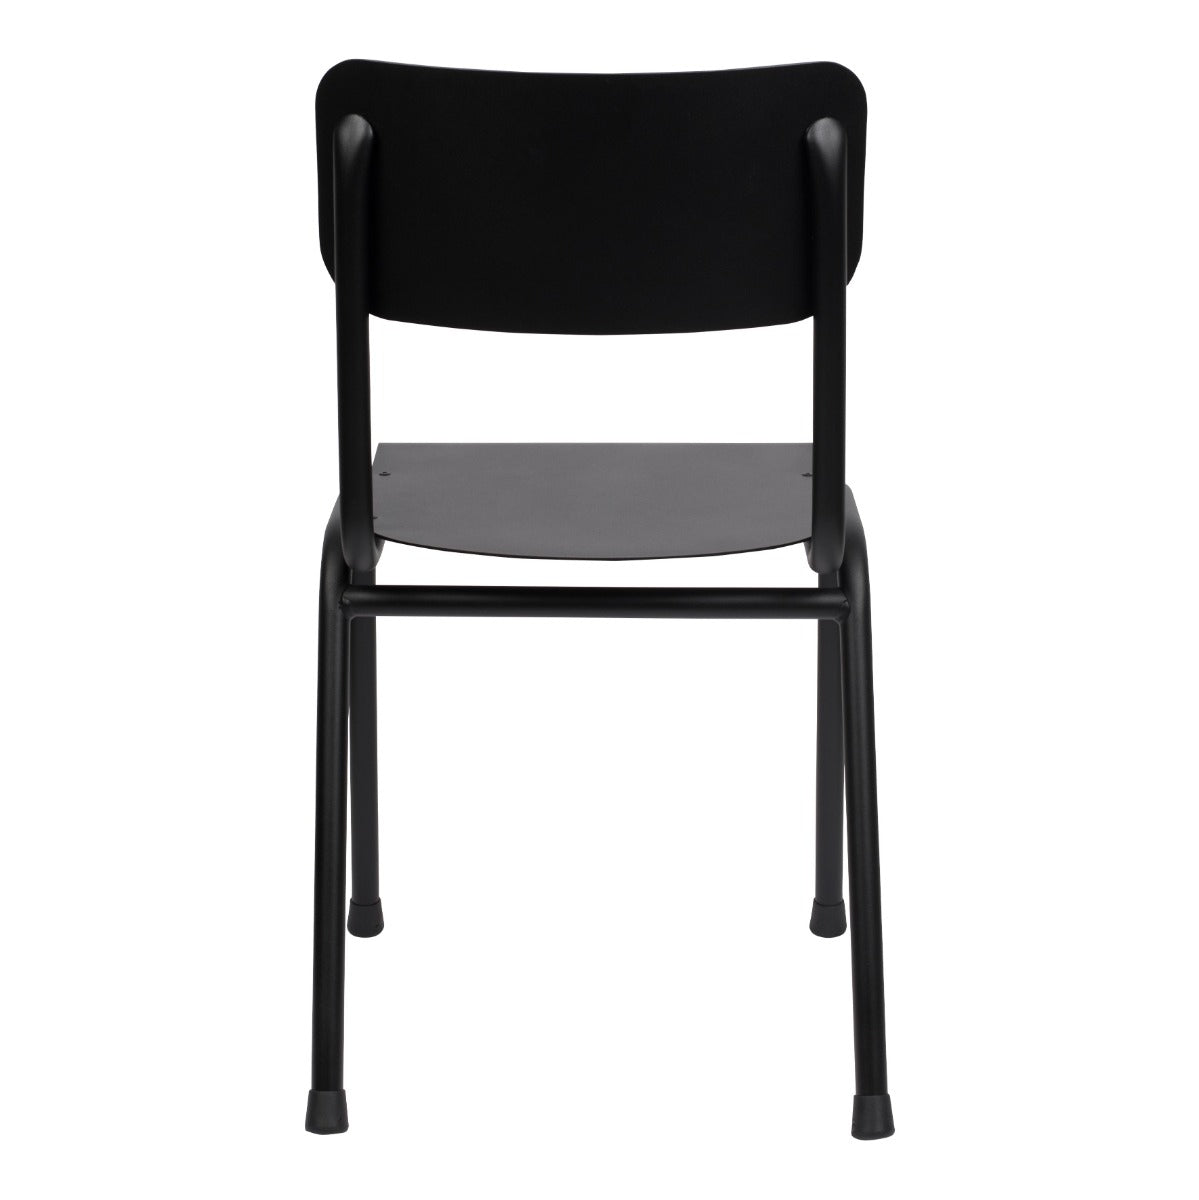 BACK TO SCHOOL outdoor chair black, Zuiver, Eye on Design